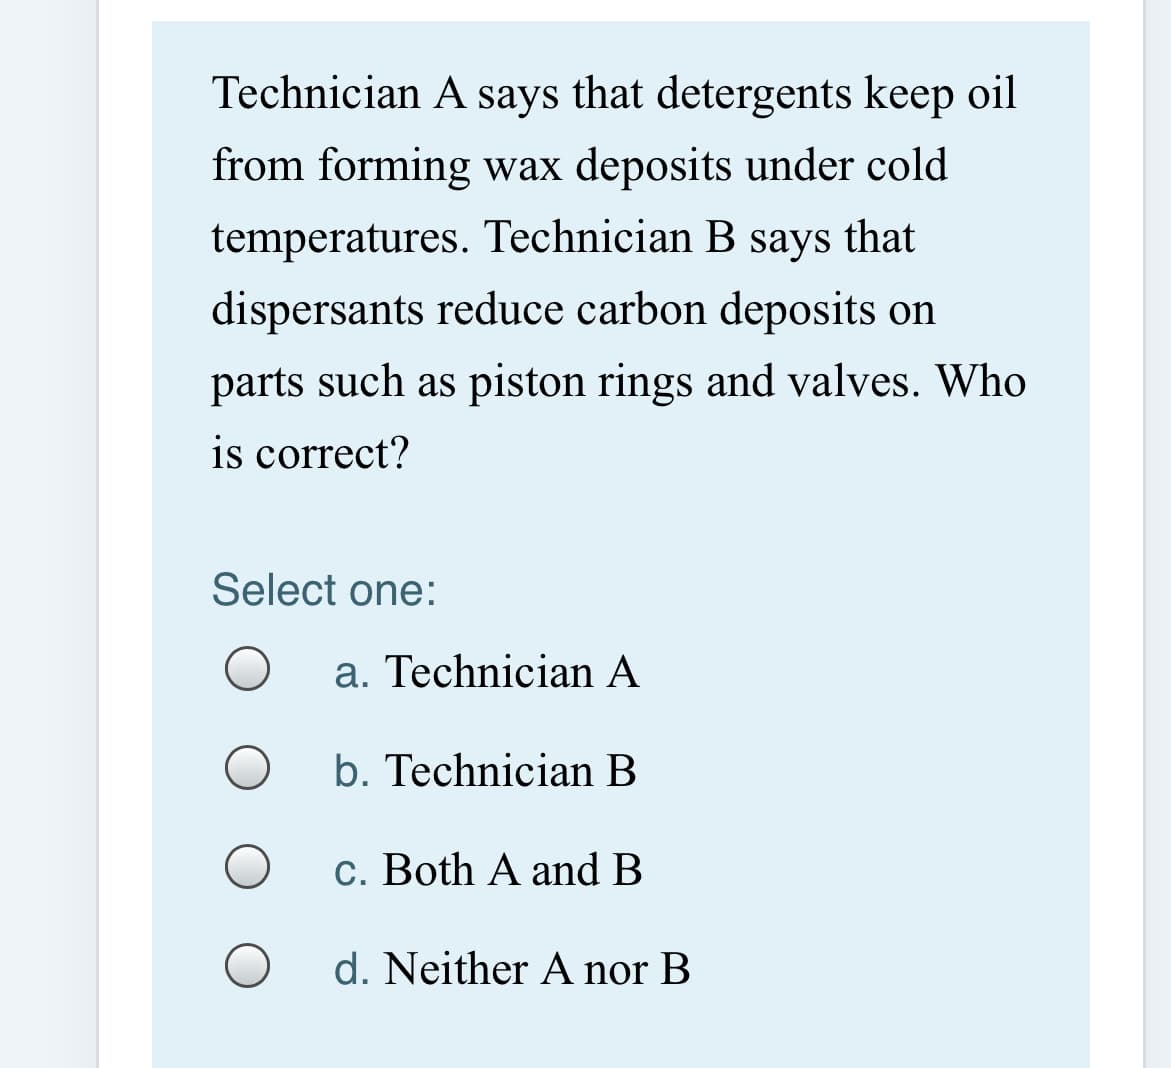 Technician A says that detergents keep oil
from forming wax deposits under cold
temperatures. Technician B says that
dispersants reduce carbon deposits on
parts such as piston rings and valves. Who
is correct?
Select one:
a. Technician A
b. Technician B
c. Both A and B
d. Neither A nor B
